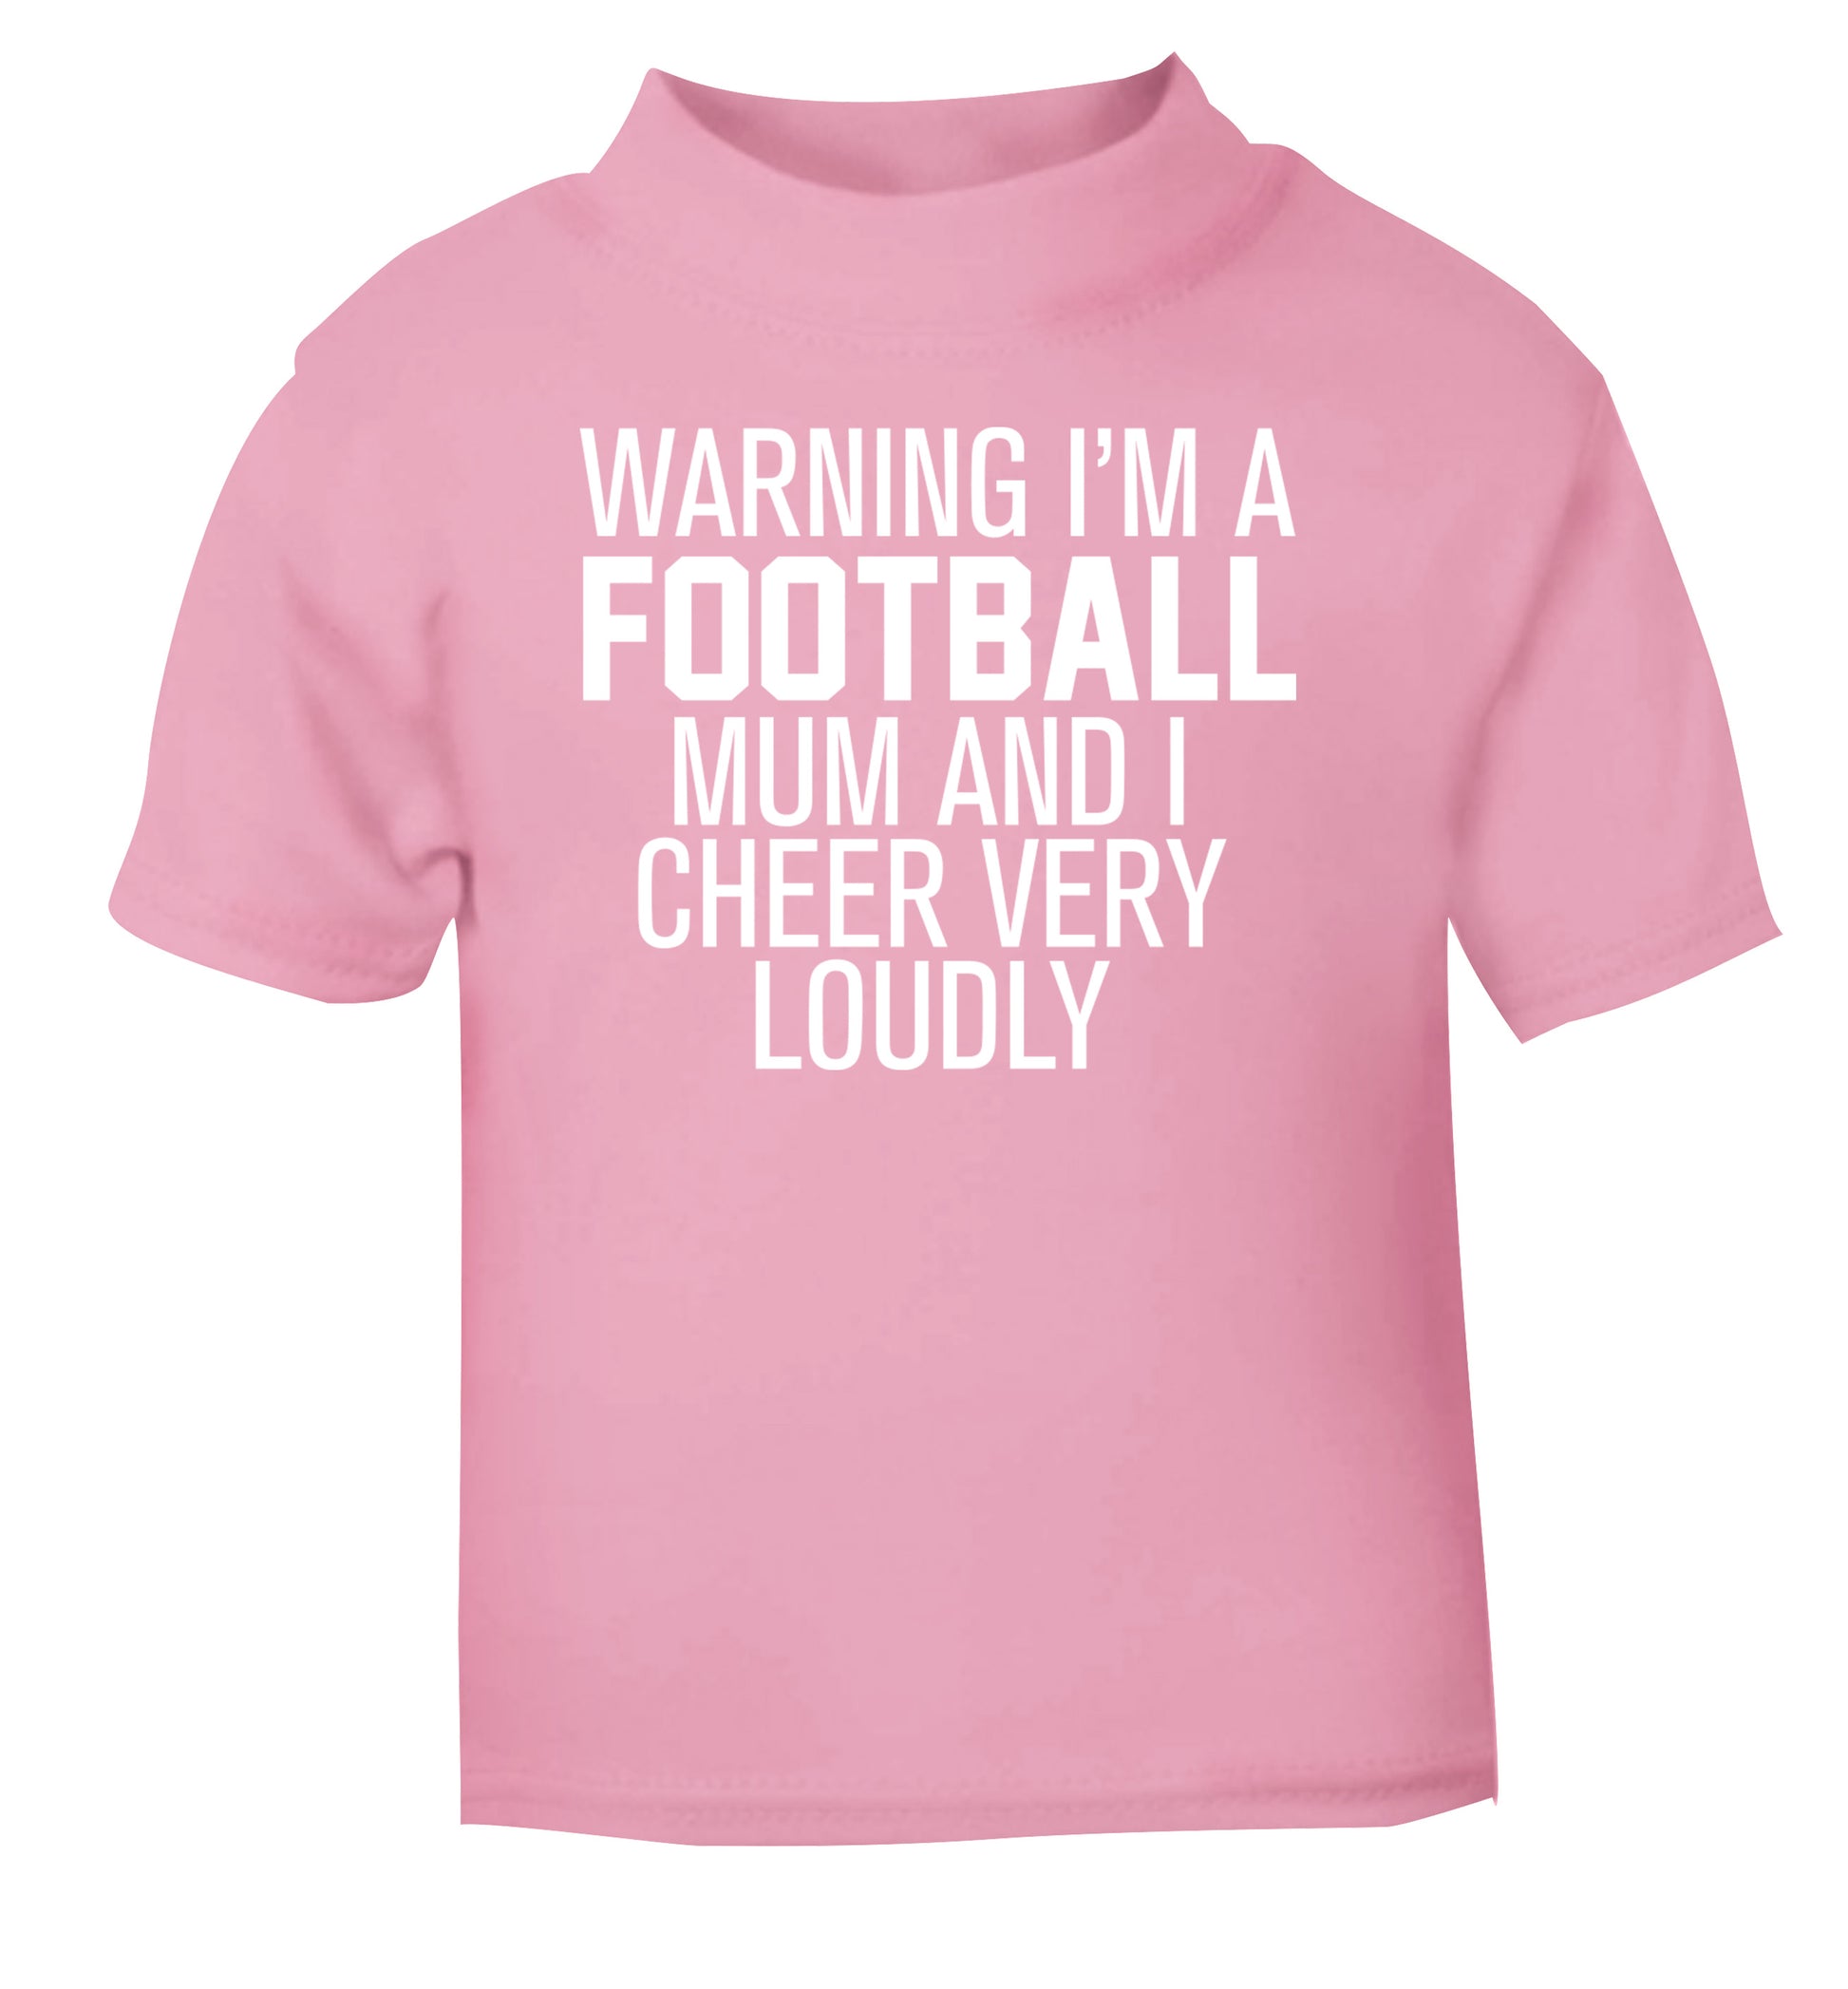 Warning I'm a football mum and I cheer very loudly light pink Baby Toddler Tshirt 2 Years